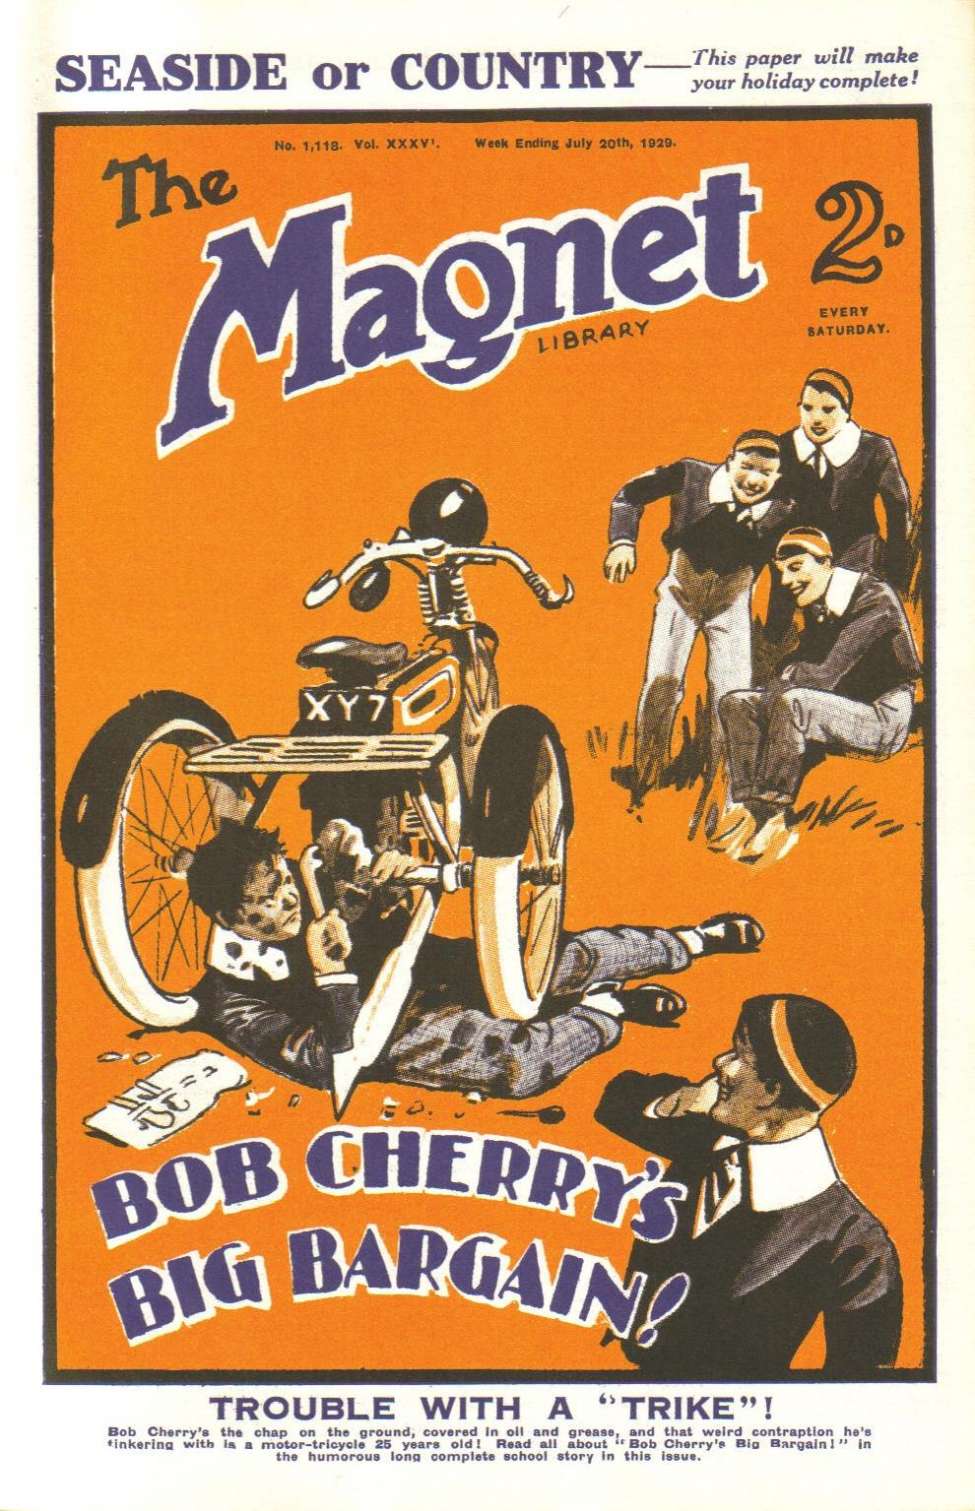 Book Cover For The Magnet 1118 - Bob Cherry's Big Bargain!